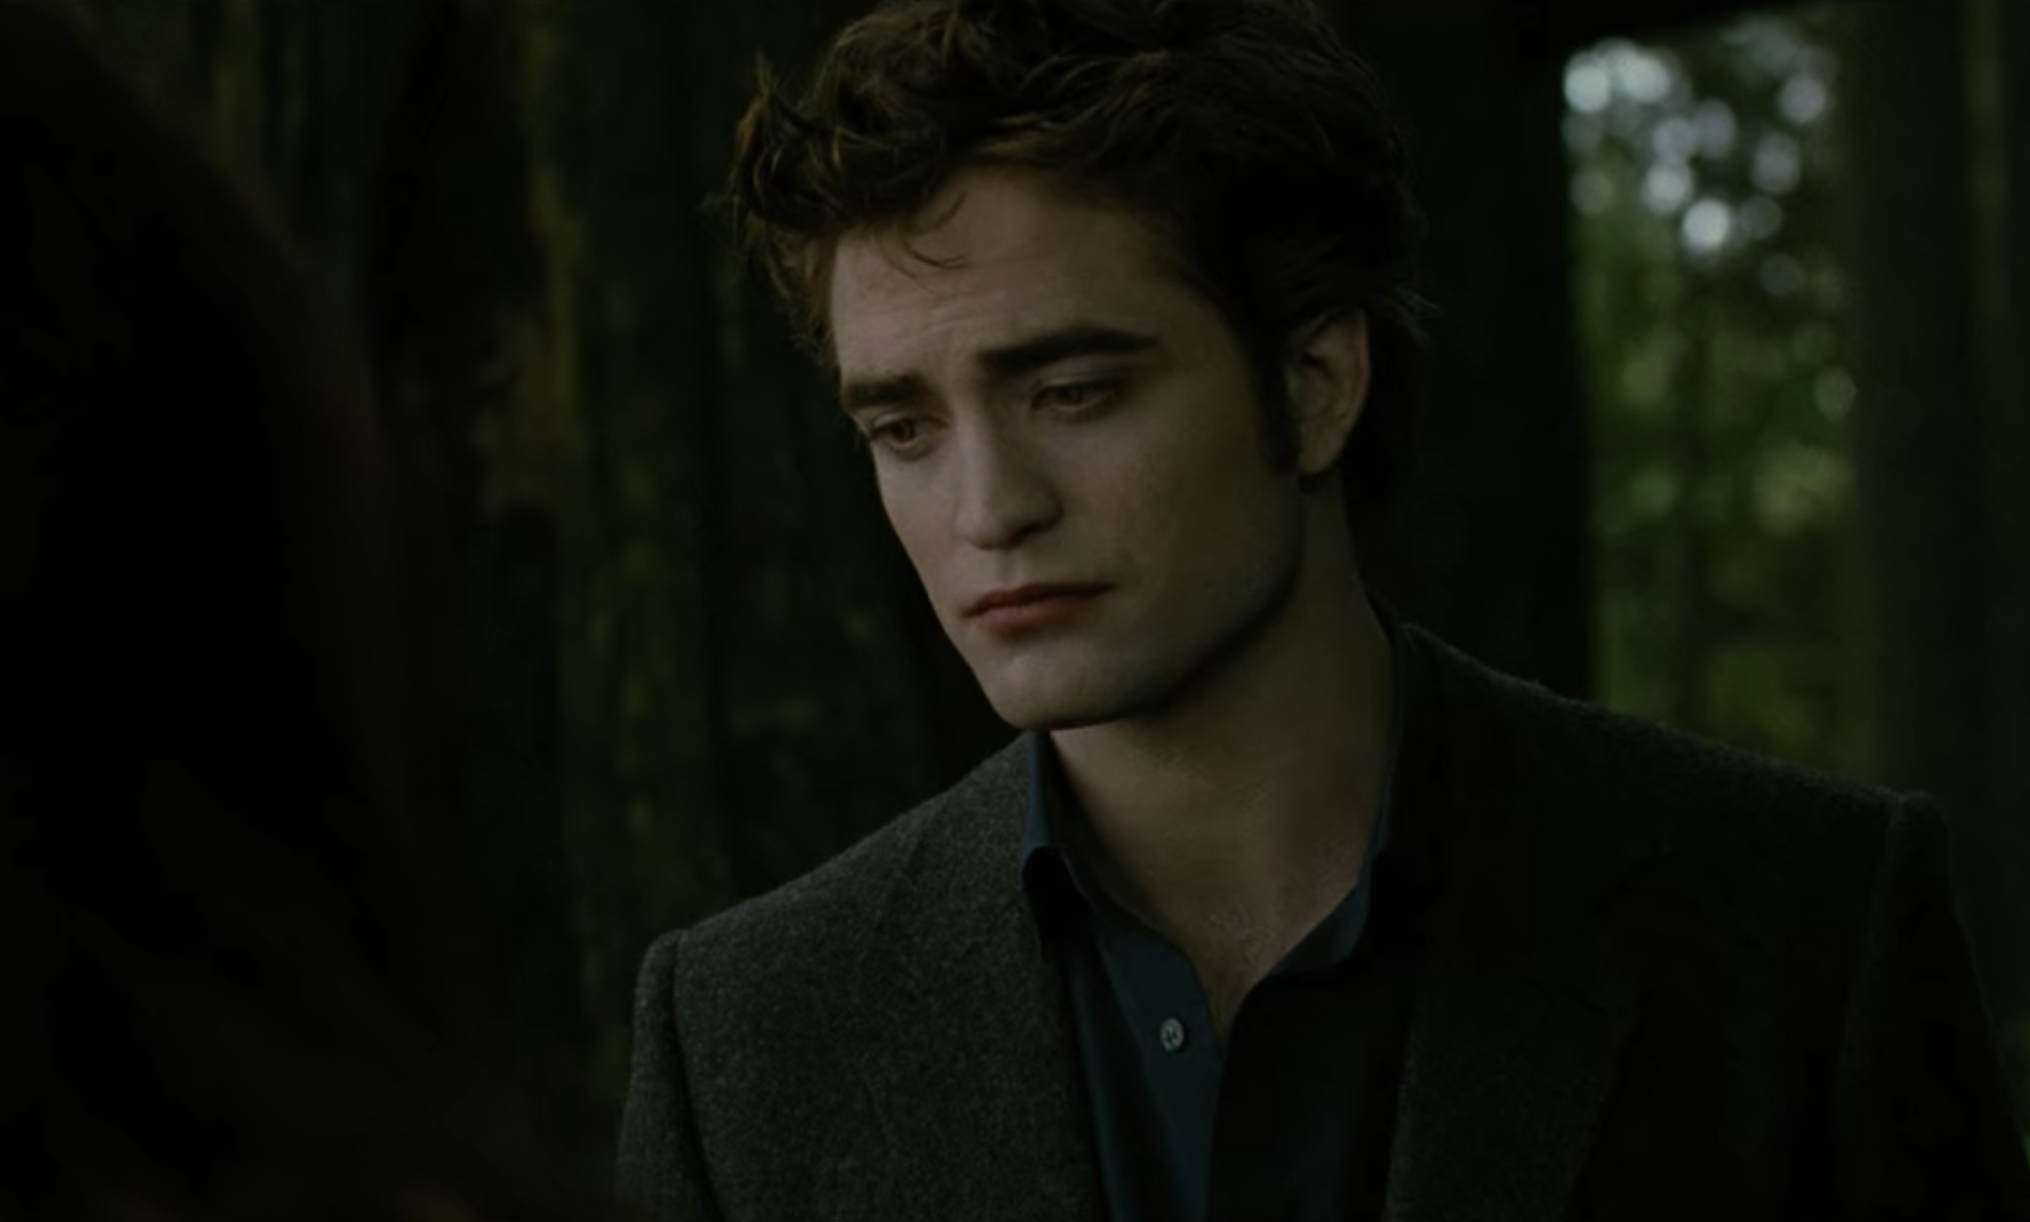 Edward breaks up with Bella in &quot;New Moon&quot;